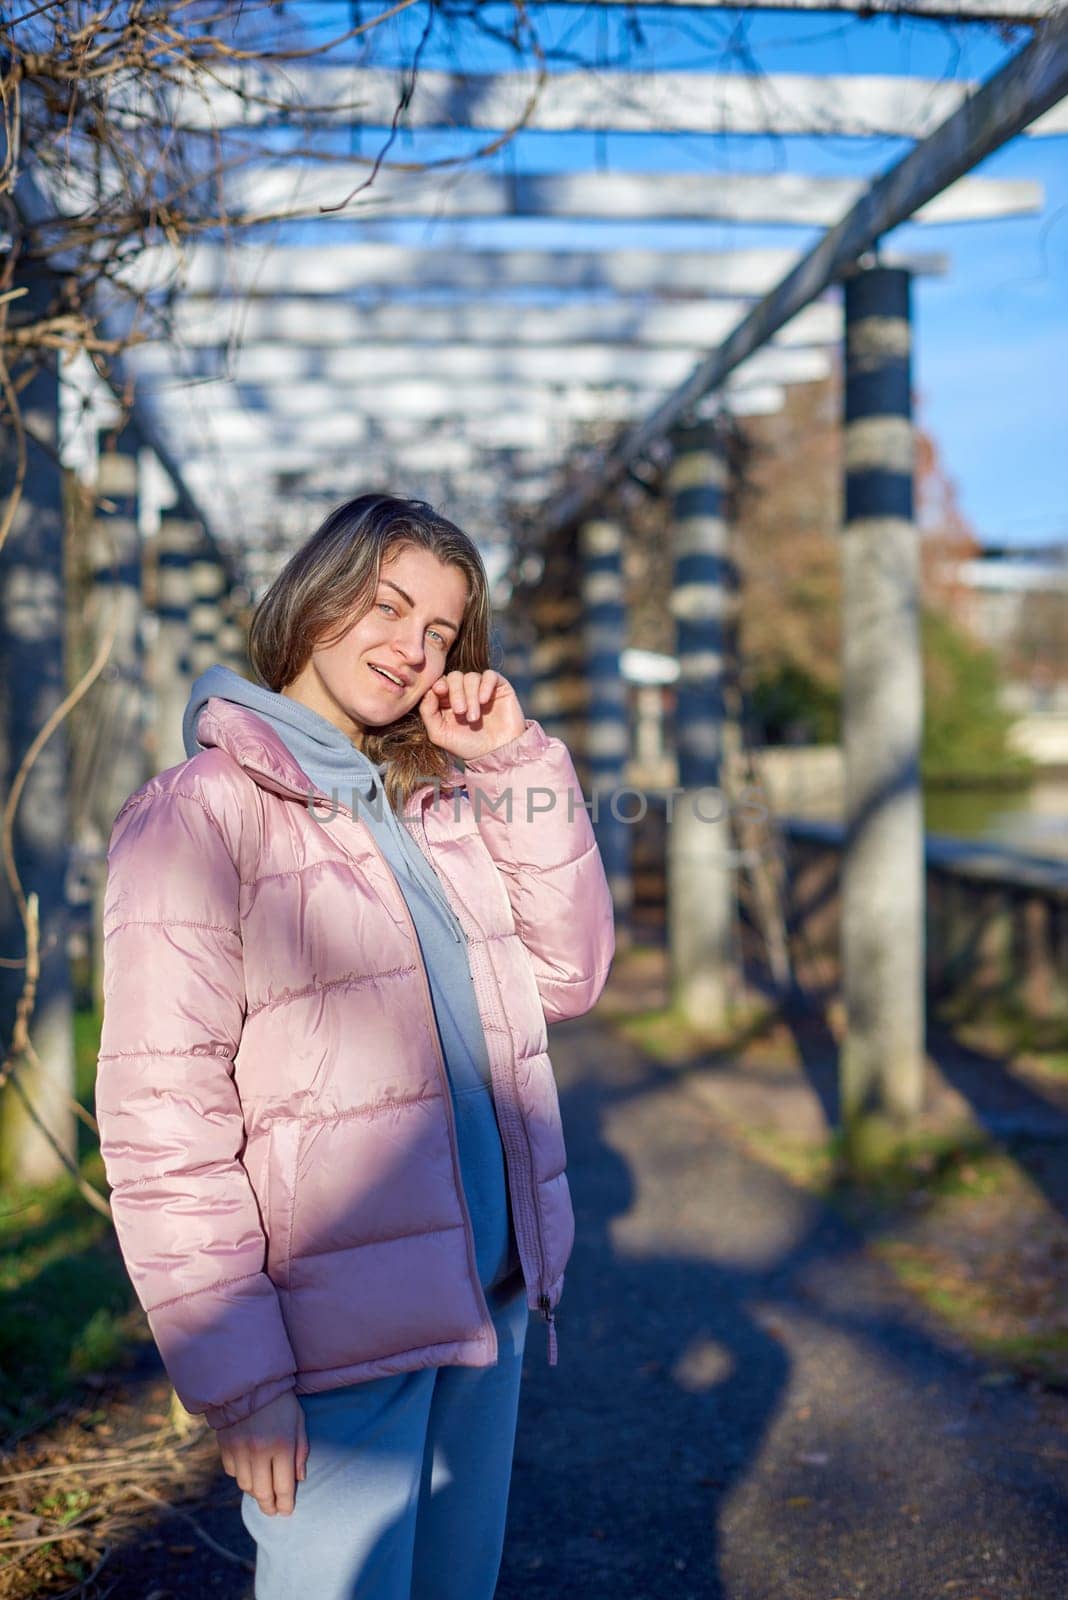 Winter Fun in Bitigheim-Bissingen: Beautiful Girl in Pink Jacket Amidst Half-Timbered Charm. a lovely girl in a pink winter jacket standing in the archway of the historic town of Bitigheim-Bissingen, Baden-Württemberg, Germany. by Andrii_Ko